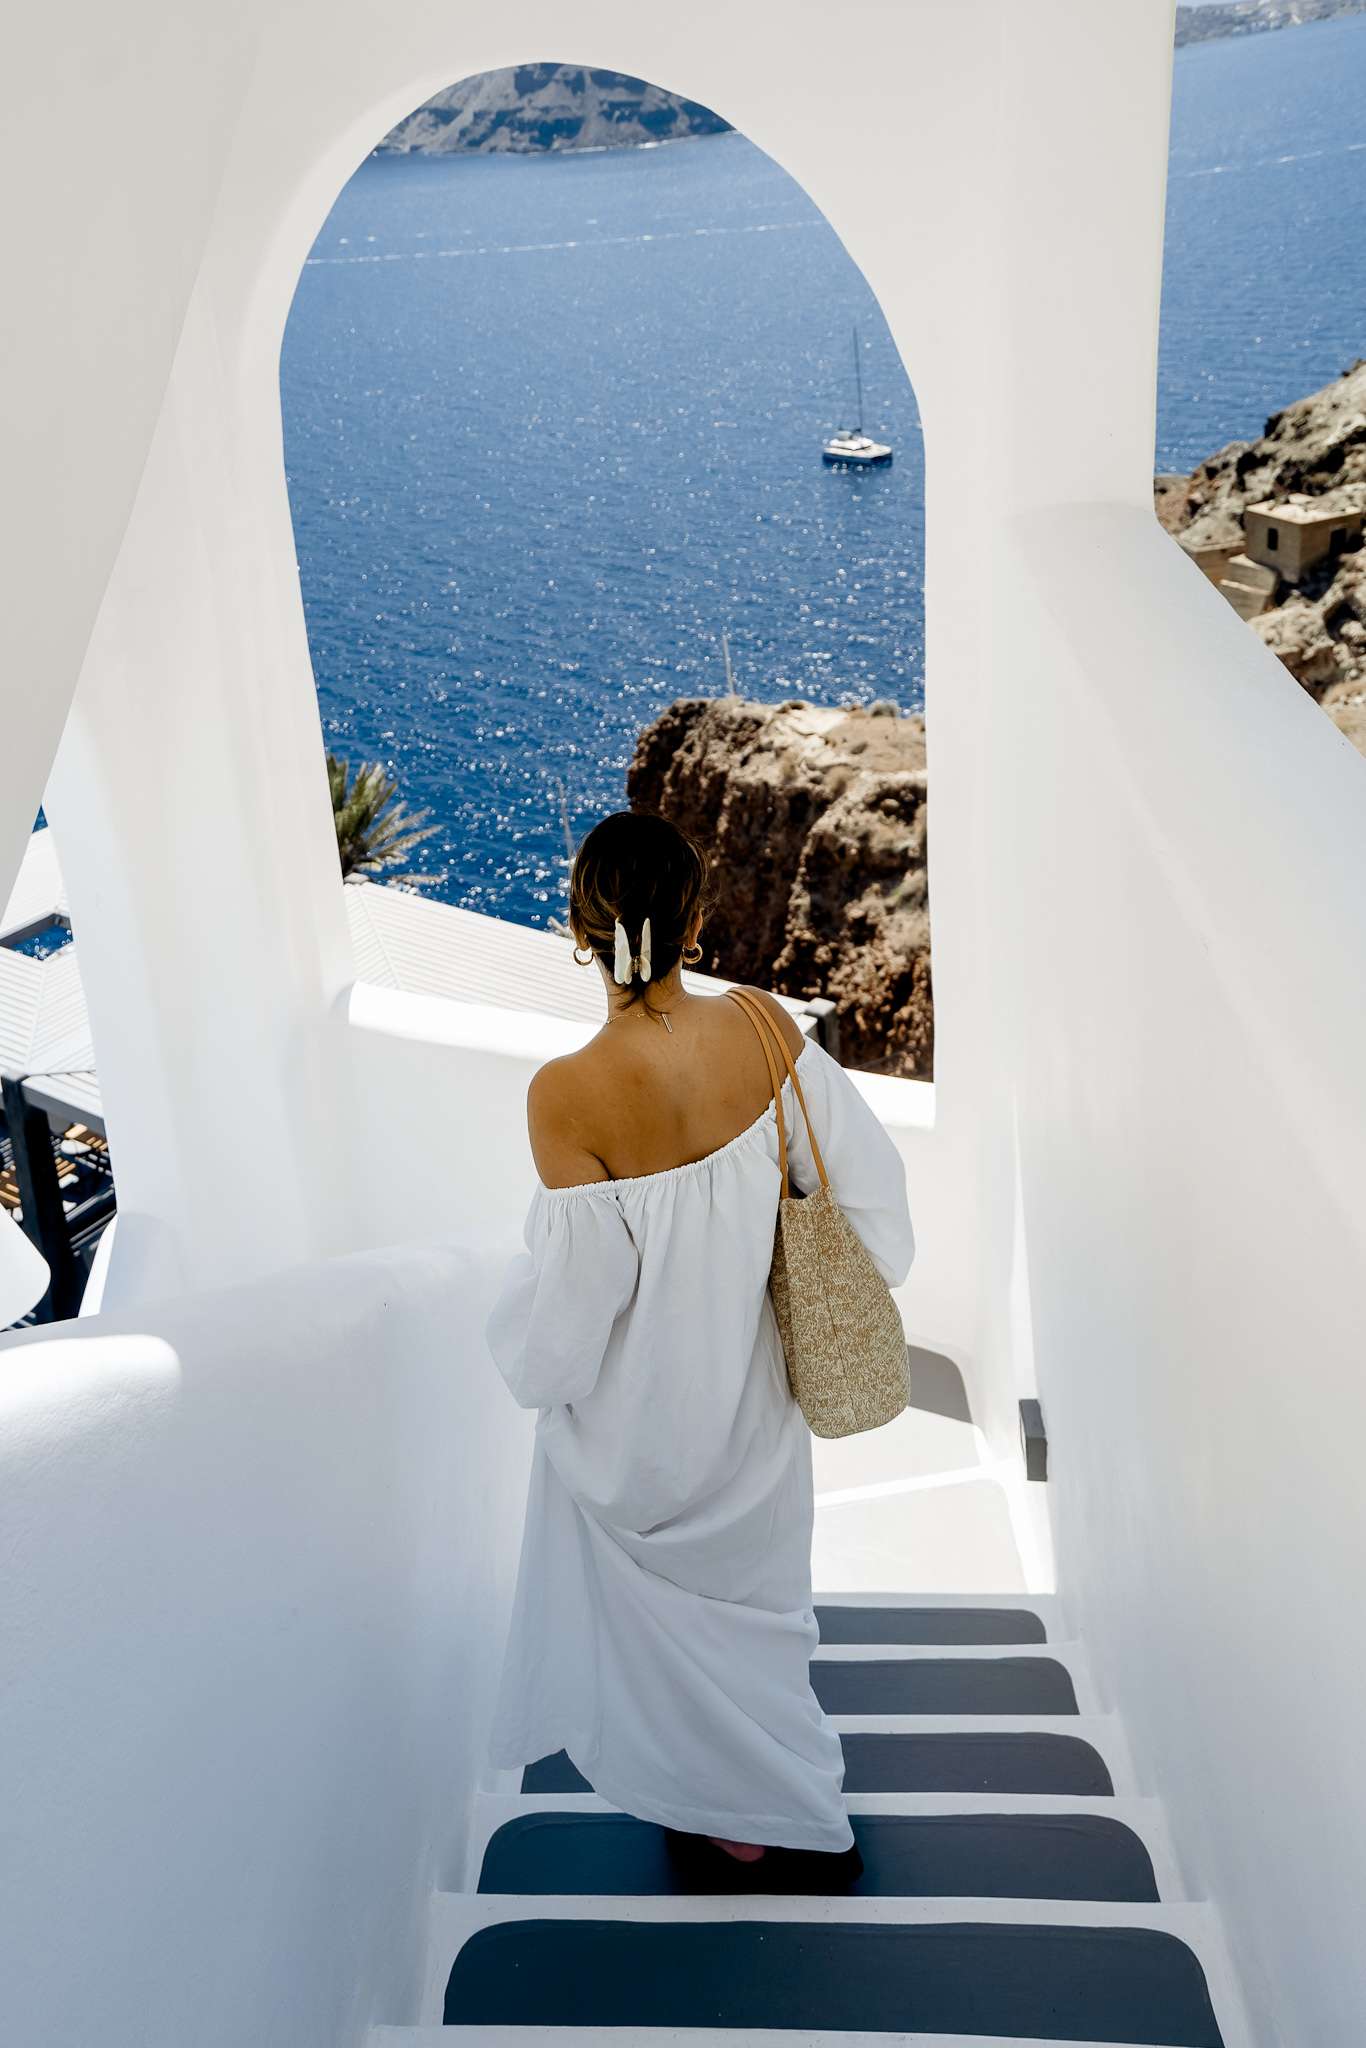 The Best Place To Stay In Santorini (Towns & Hotels)